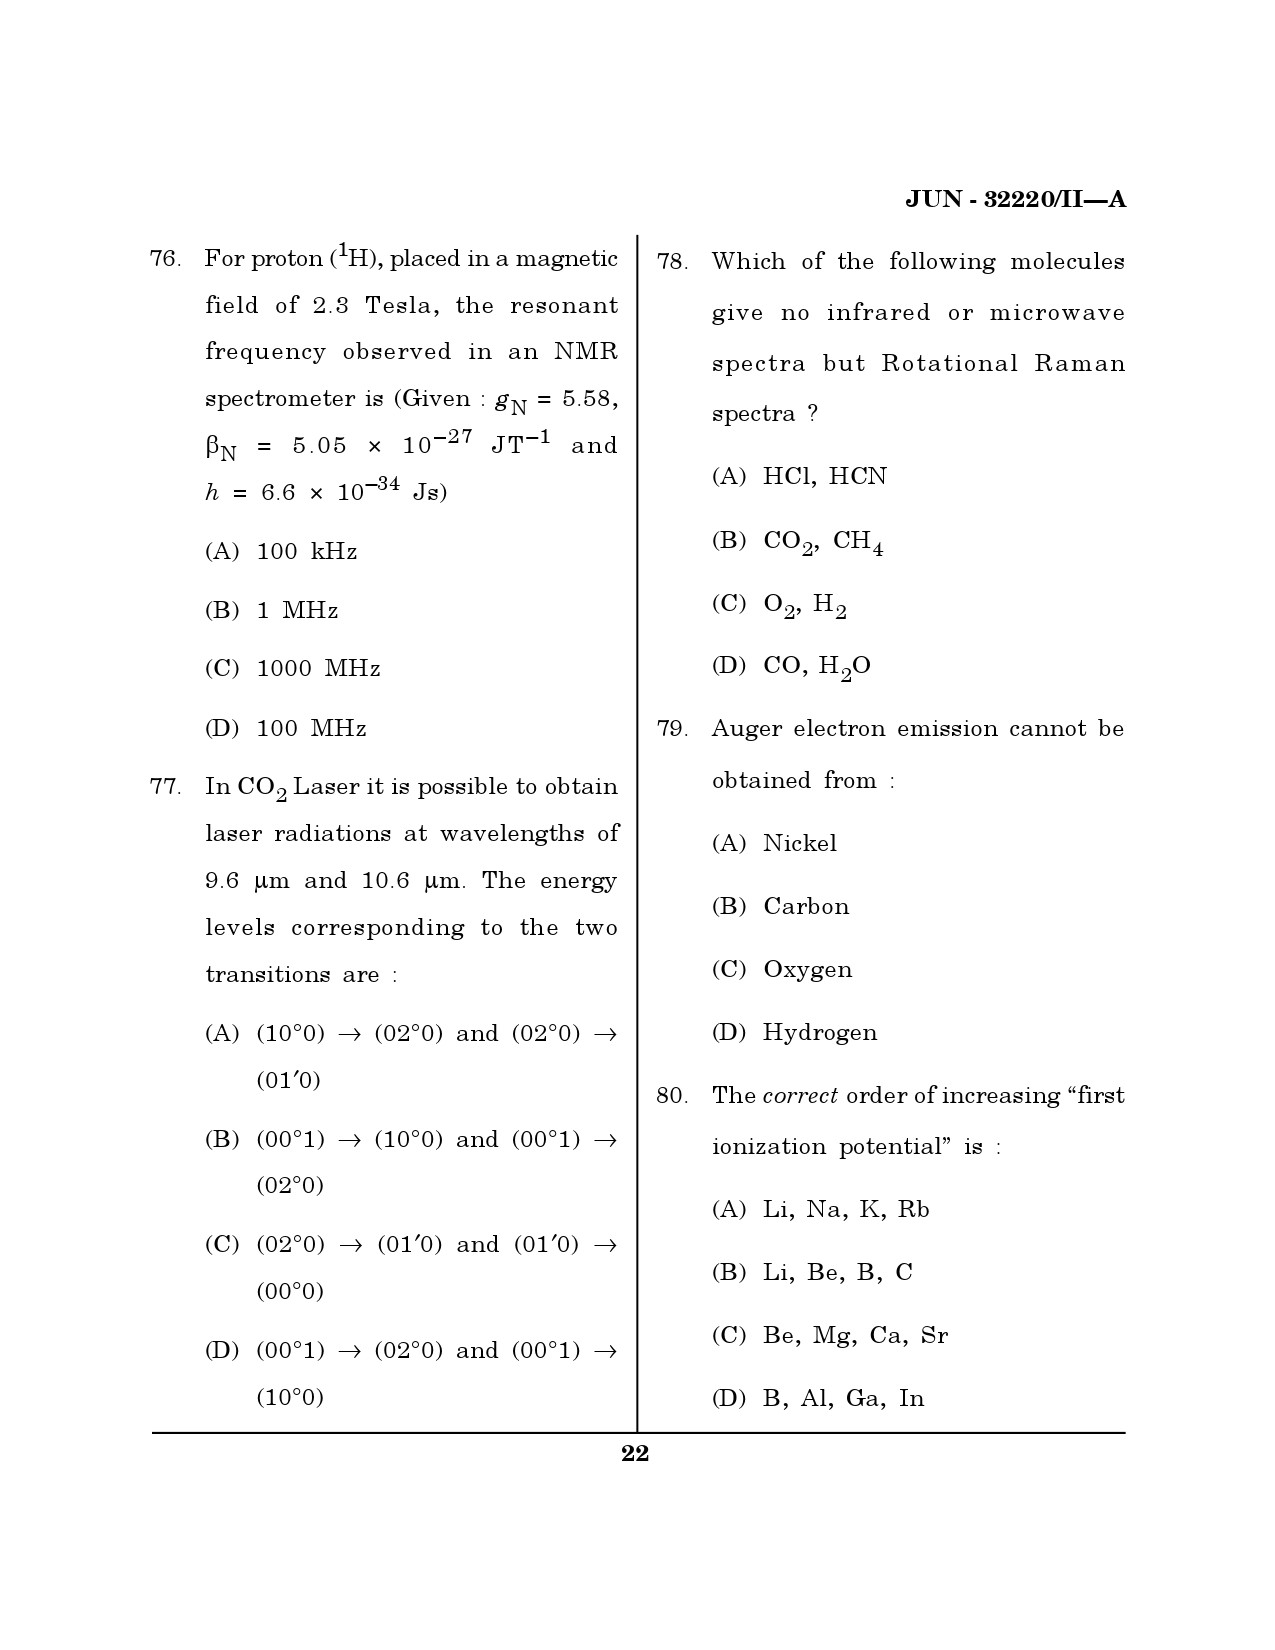 Maharashtra SET Physical Science Question Paper II June 2020 21